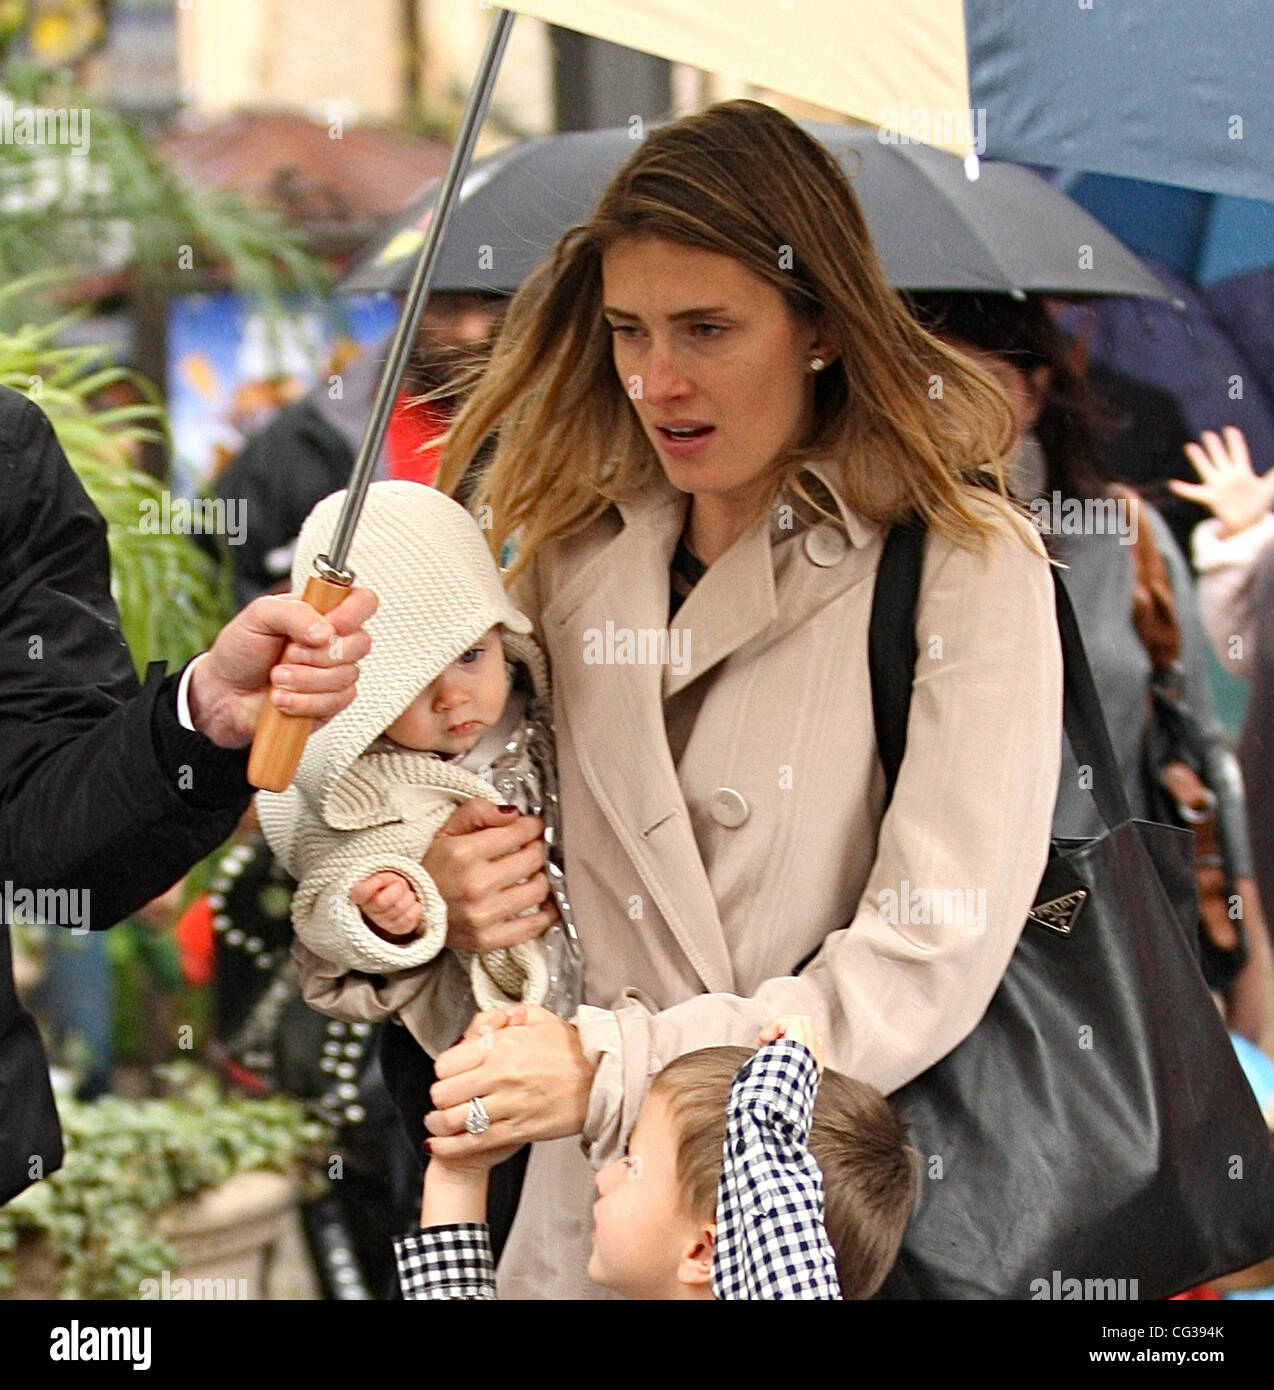 Mark Wahlberg's wife Rhea Durham and her family visit the Santa house on a rainy day during a visit to the Grove Hollywood, California - 22.12.10 Stock Photo